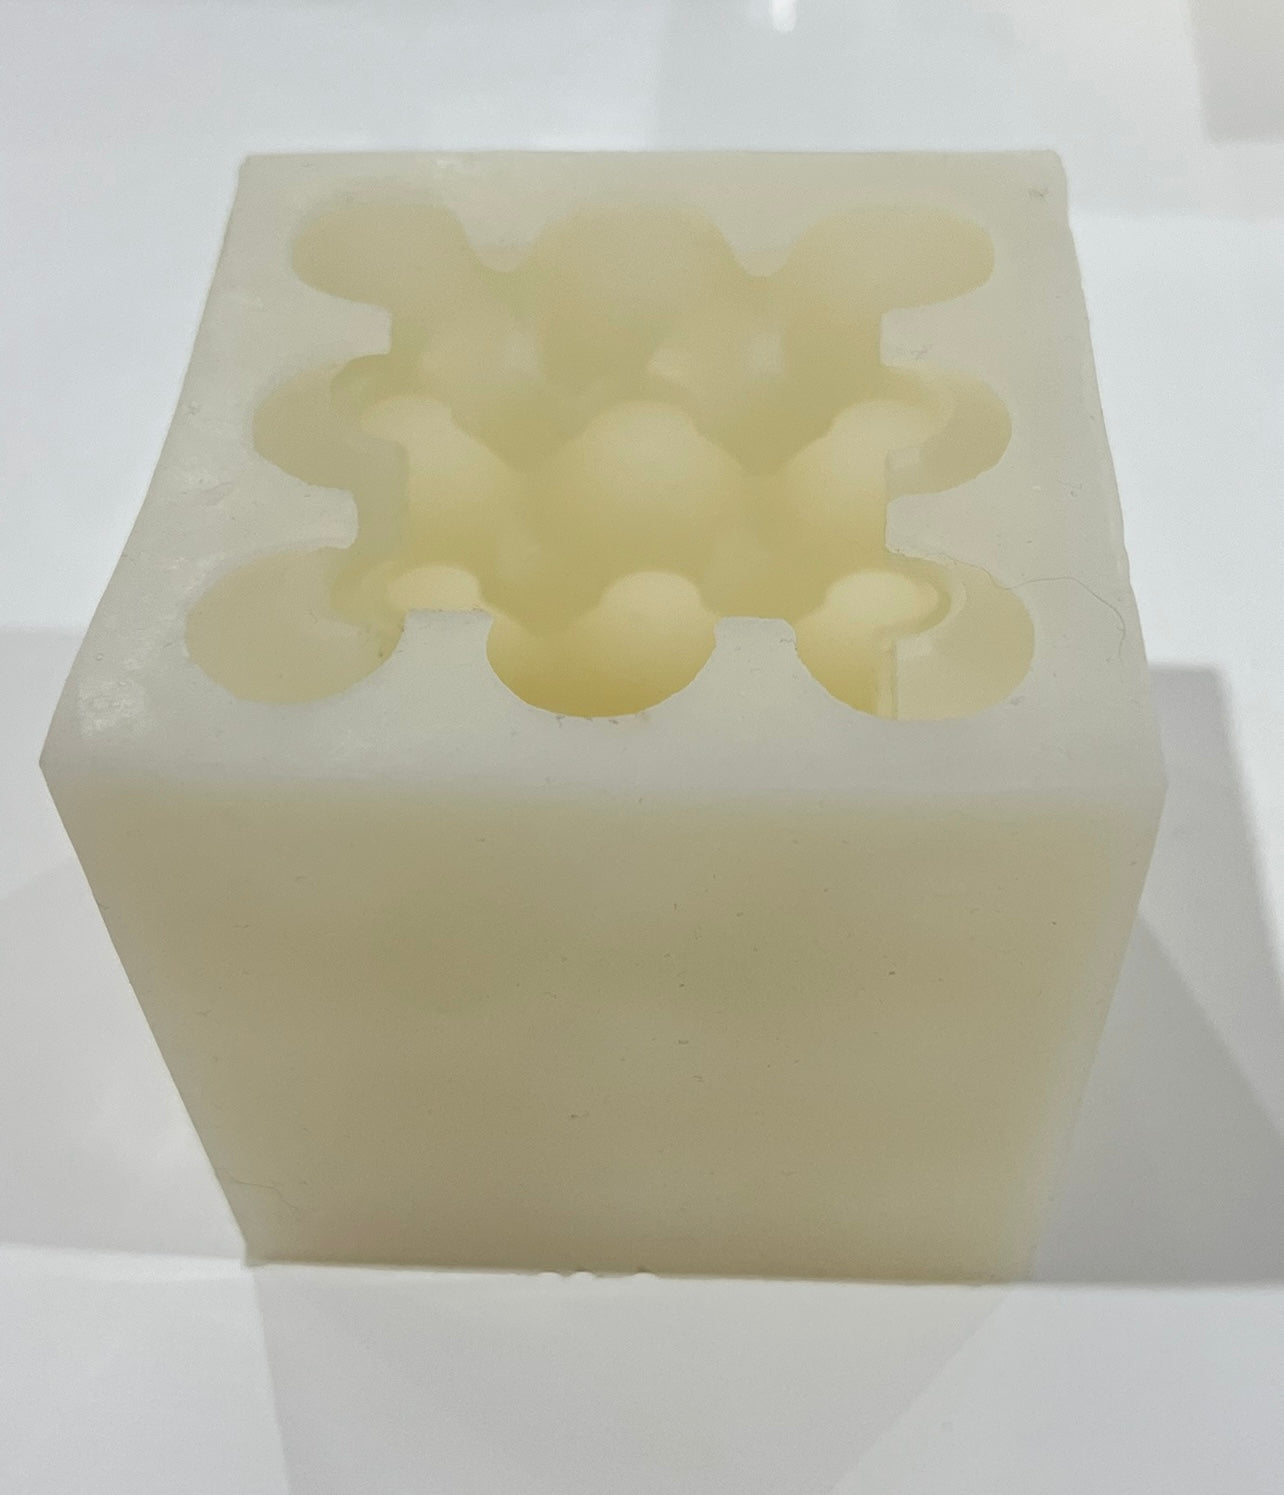 The BIG Bubble Cube Silicone Candle